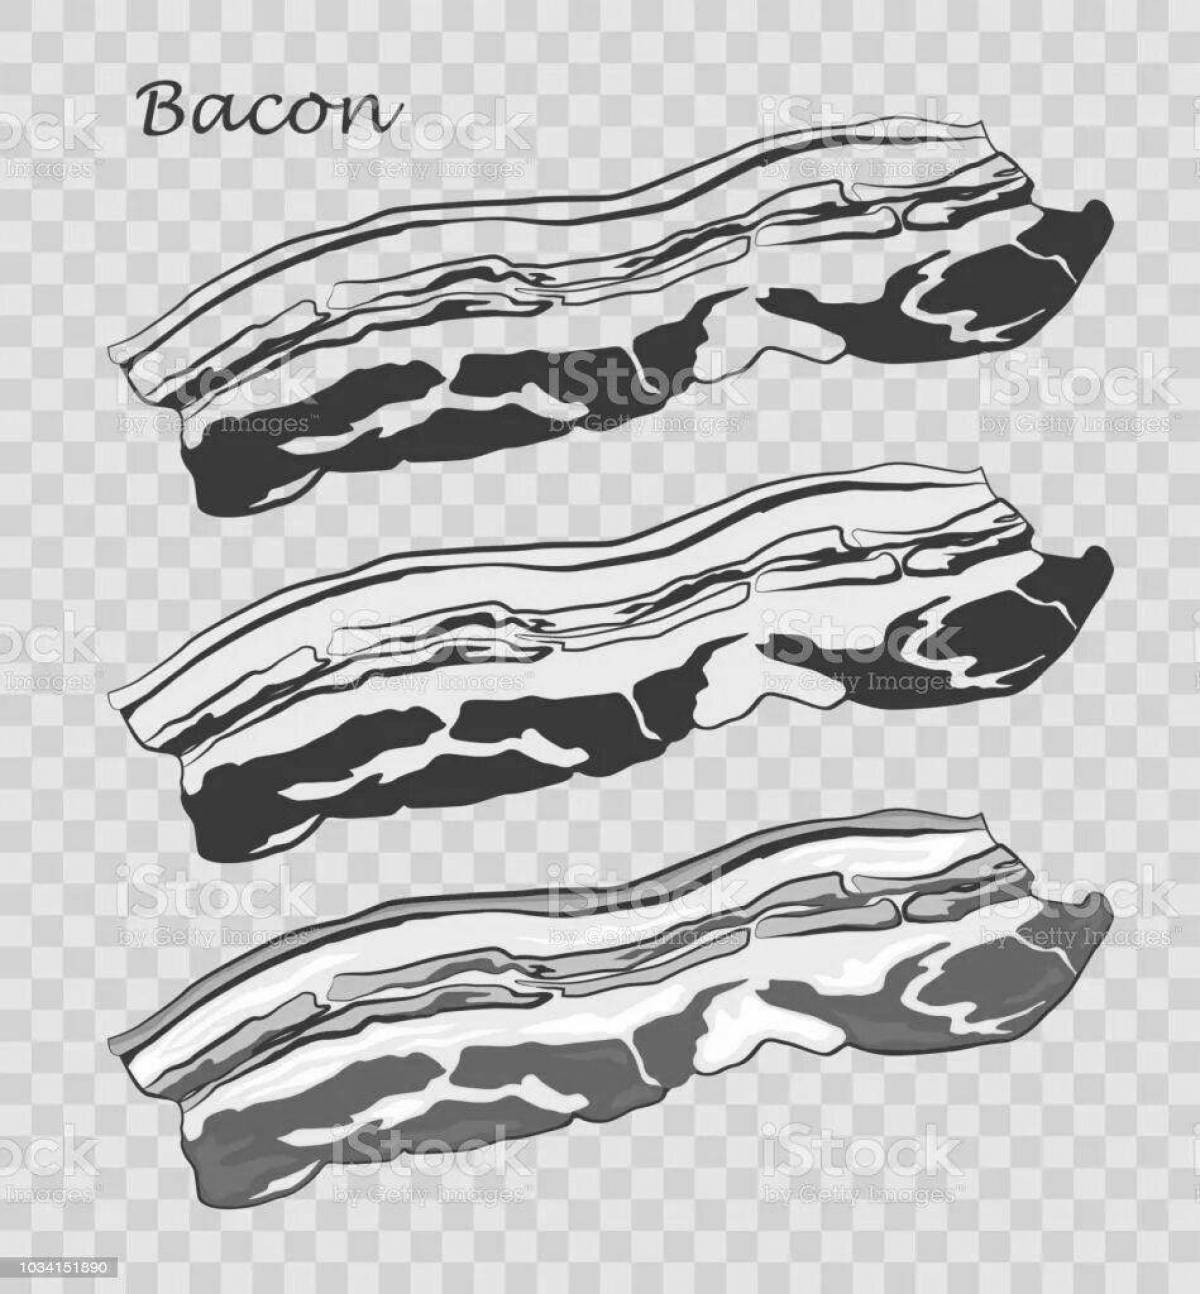 Coloring page stylish bacon